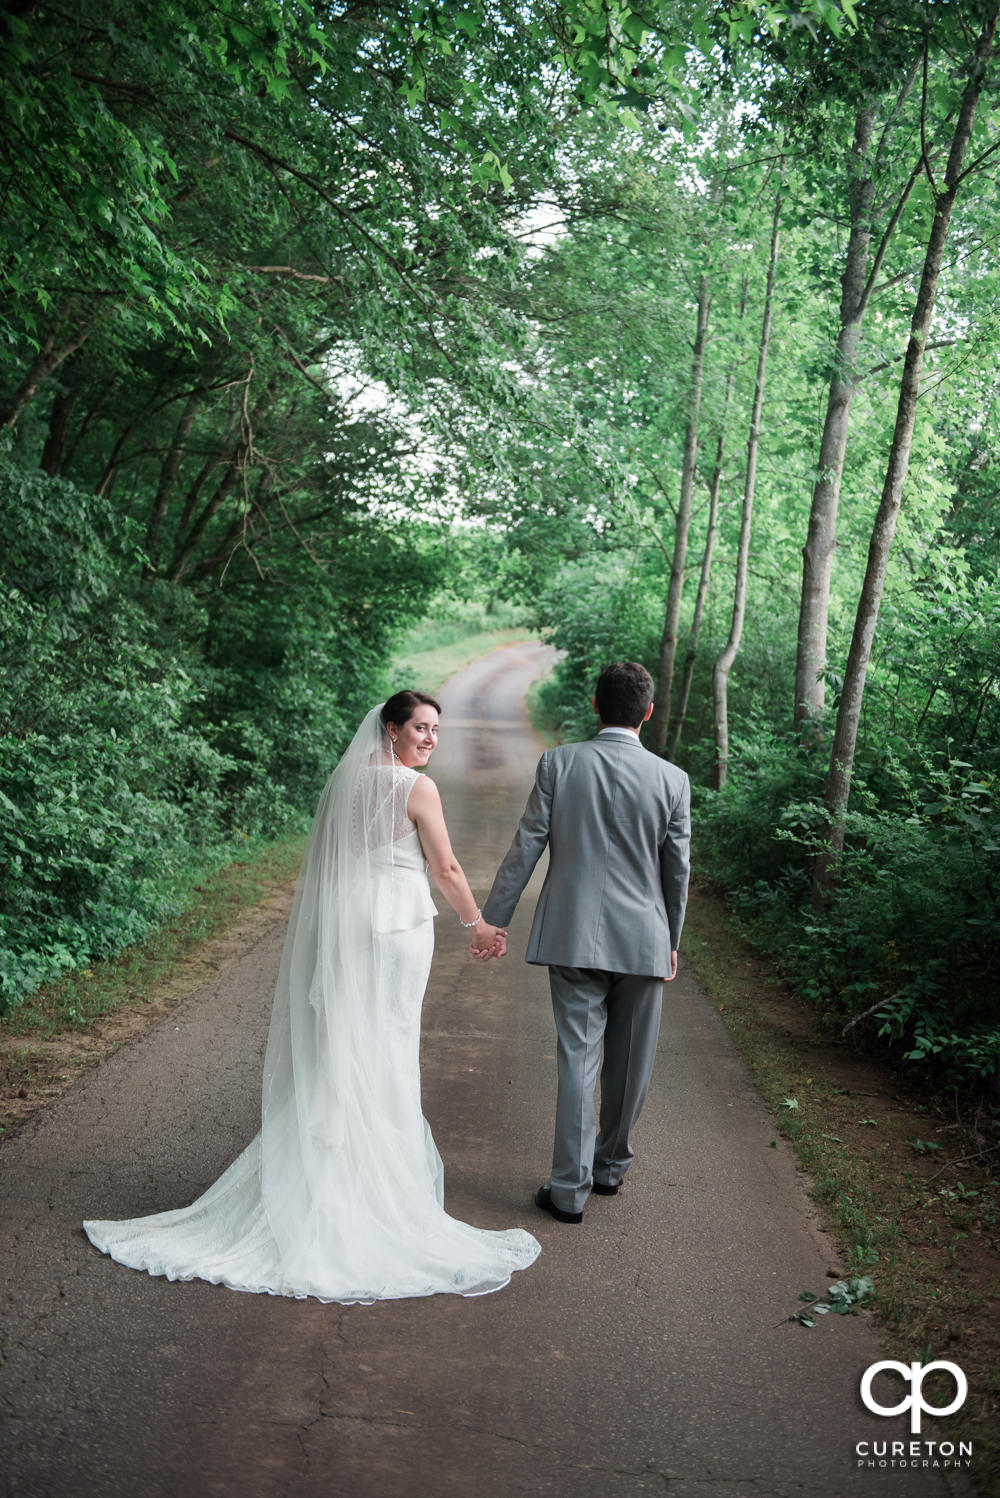 Bride and groom walking down the road.